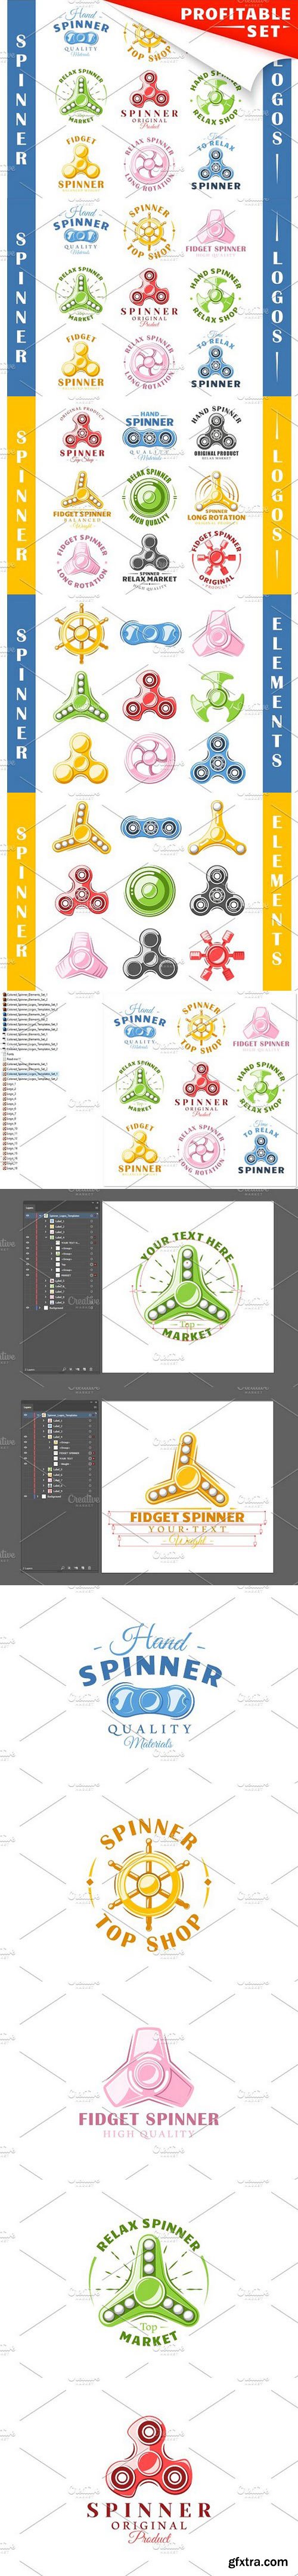 CM - 18 Colored Spinner Logos Templates 1663445